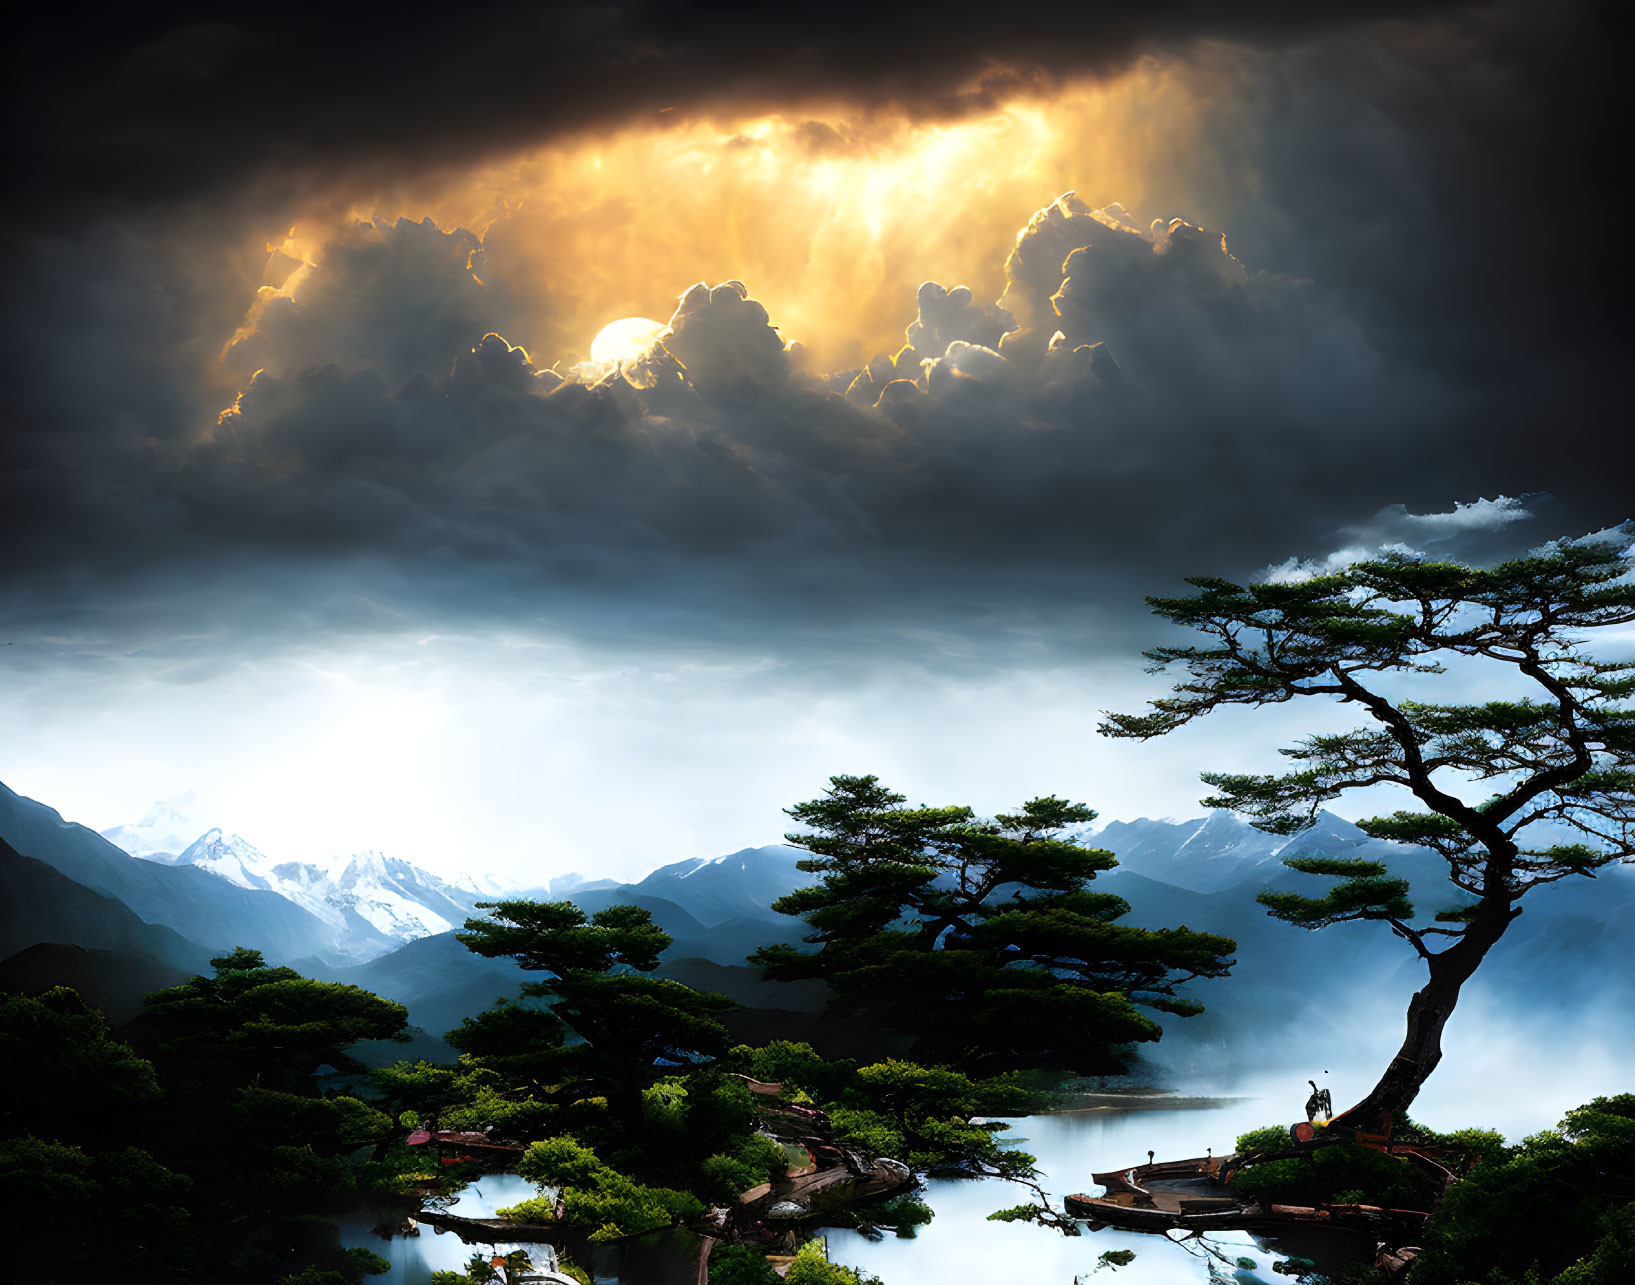 Majestic landscape with dramatic clouds, sunbeams, trees, waters, and mountains